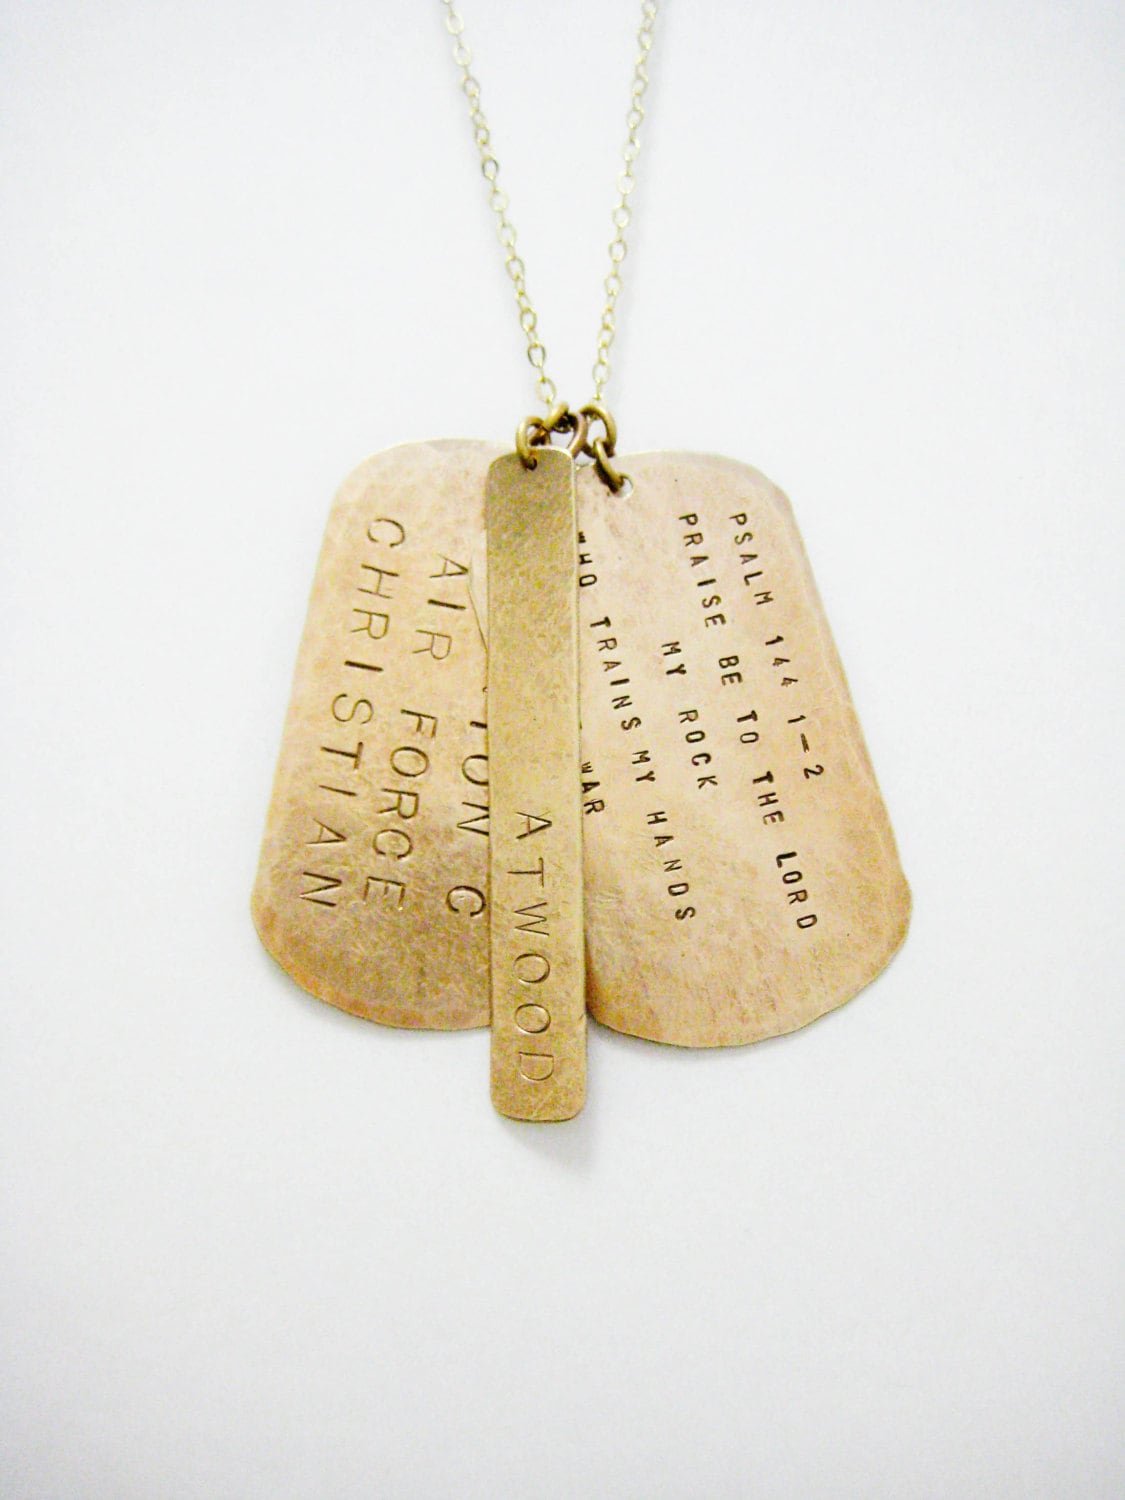 army dog tags engraved